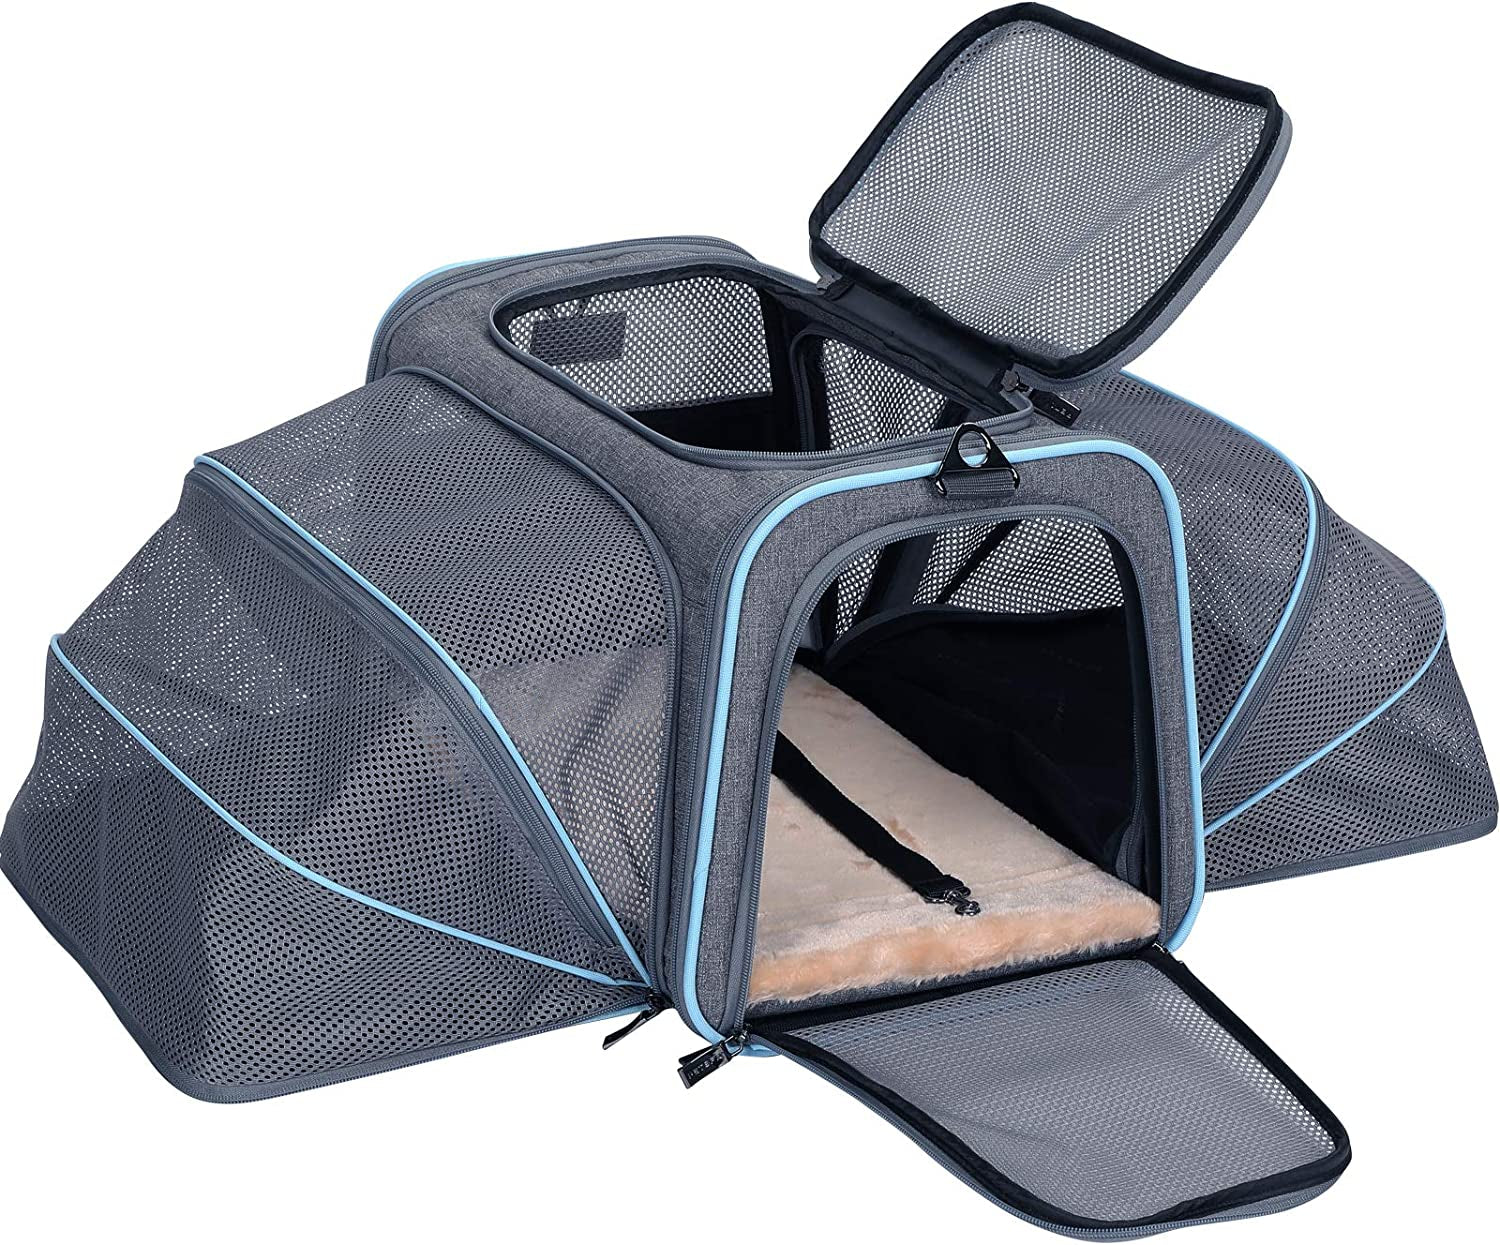 Petsfit Expandable Cat Carriers Small Dog Carrier, Airline Approved Soft-Sided Portable Washable Pet Travel Carrier with Two Extension for Kittens,Puppies,Rabbits